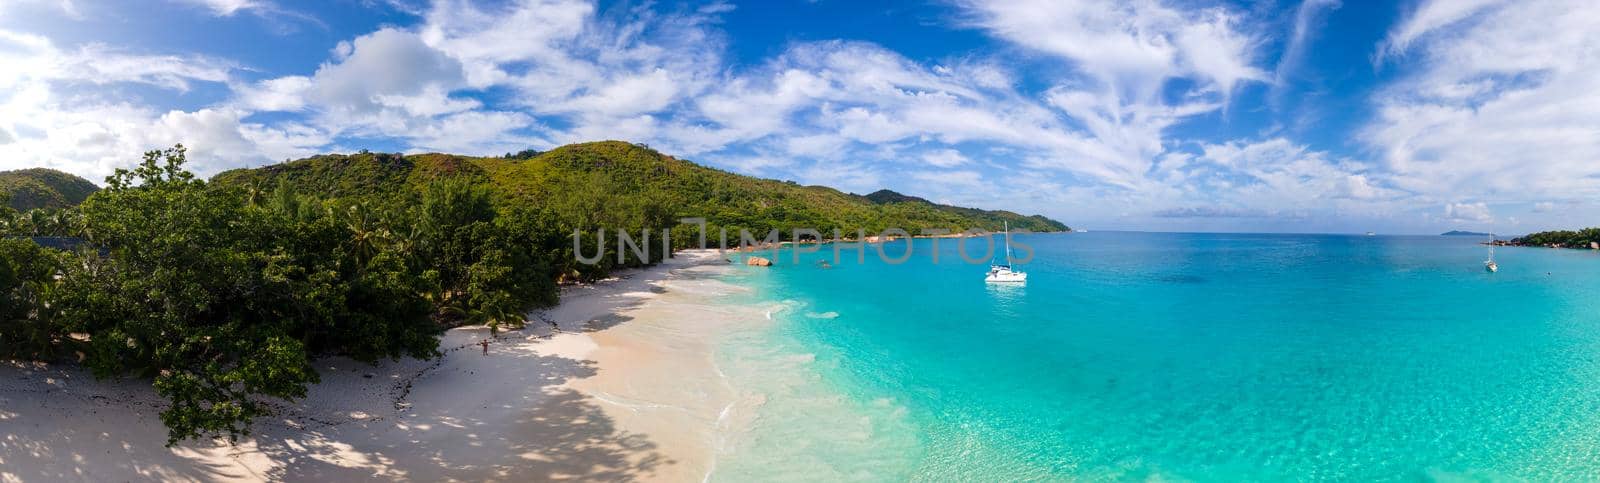 Praslin Seychelles tropical island with withe beaches and palm trees, Anse Lazio beach,Palm tree stands over deserted tropical island dream beach in Anse Lazio, Seychelles.